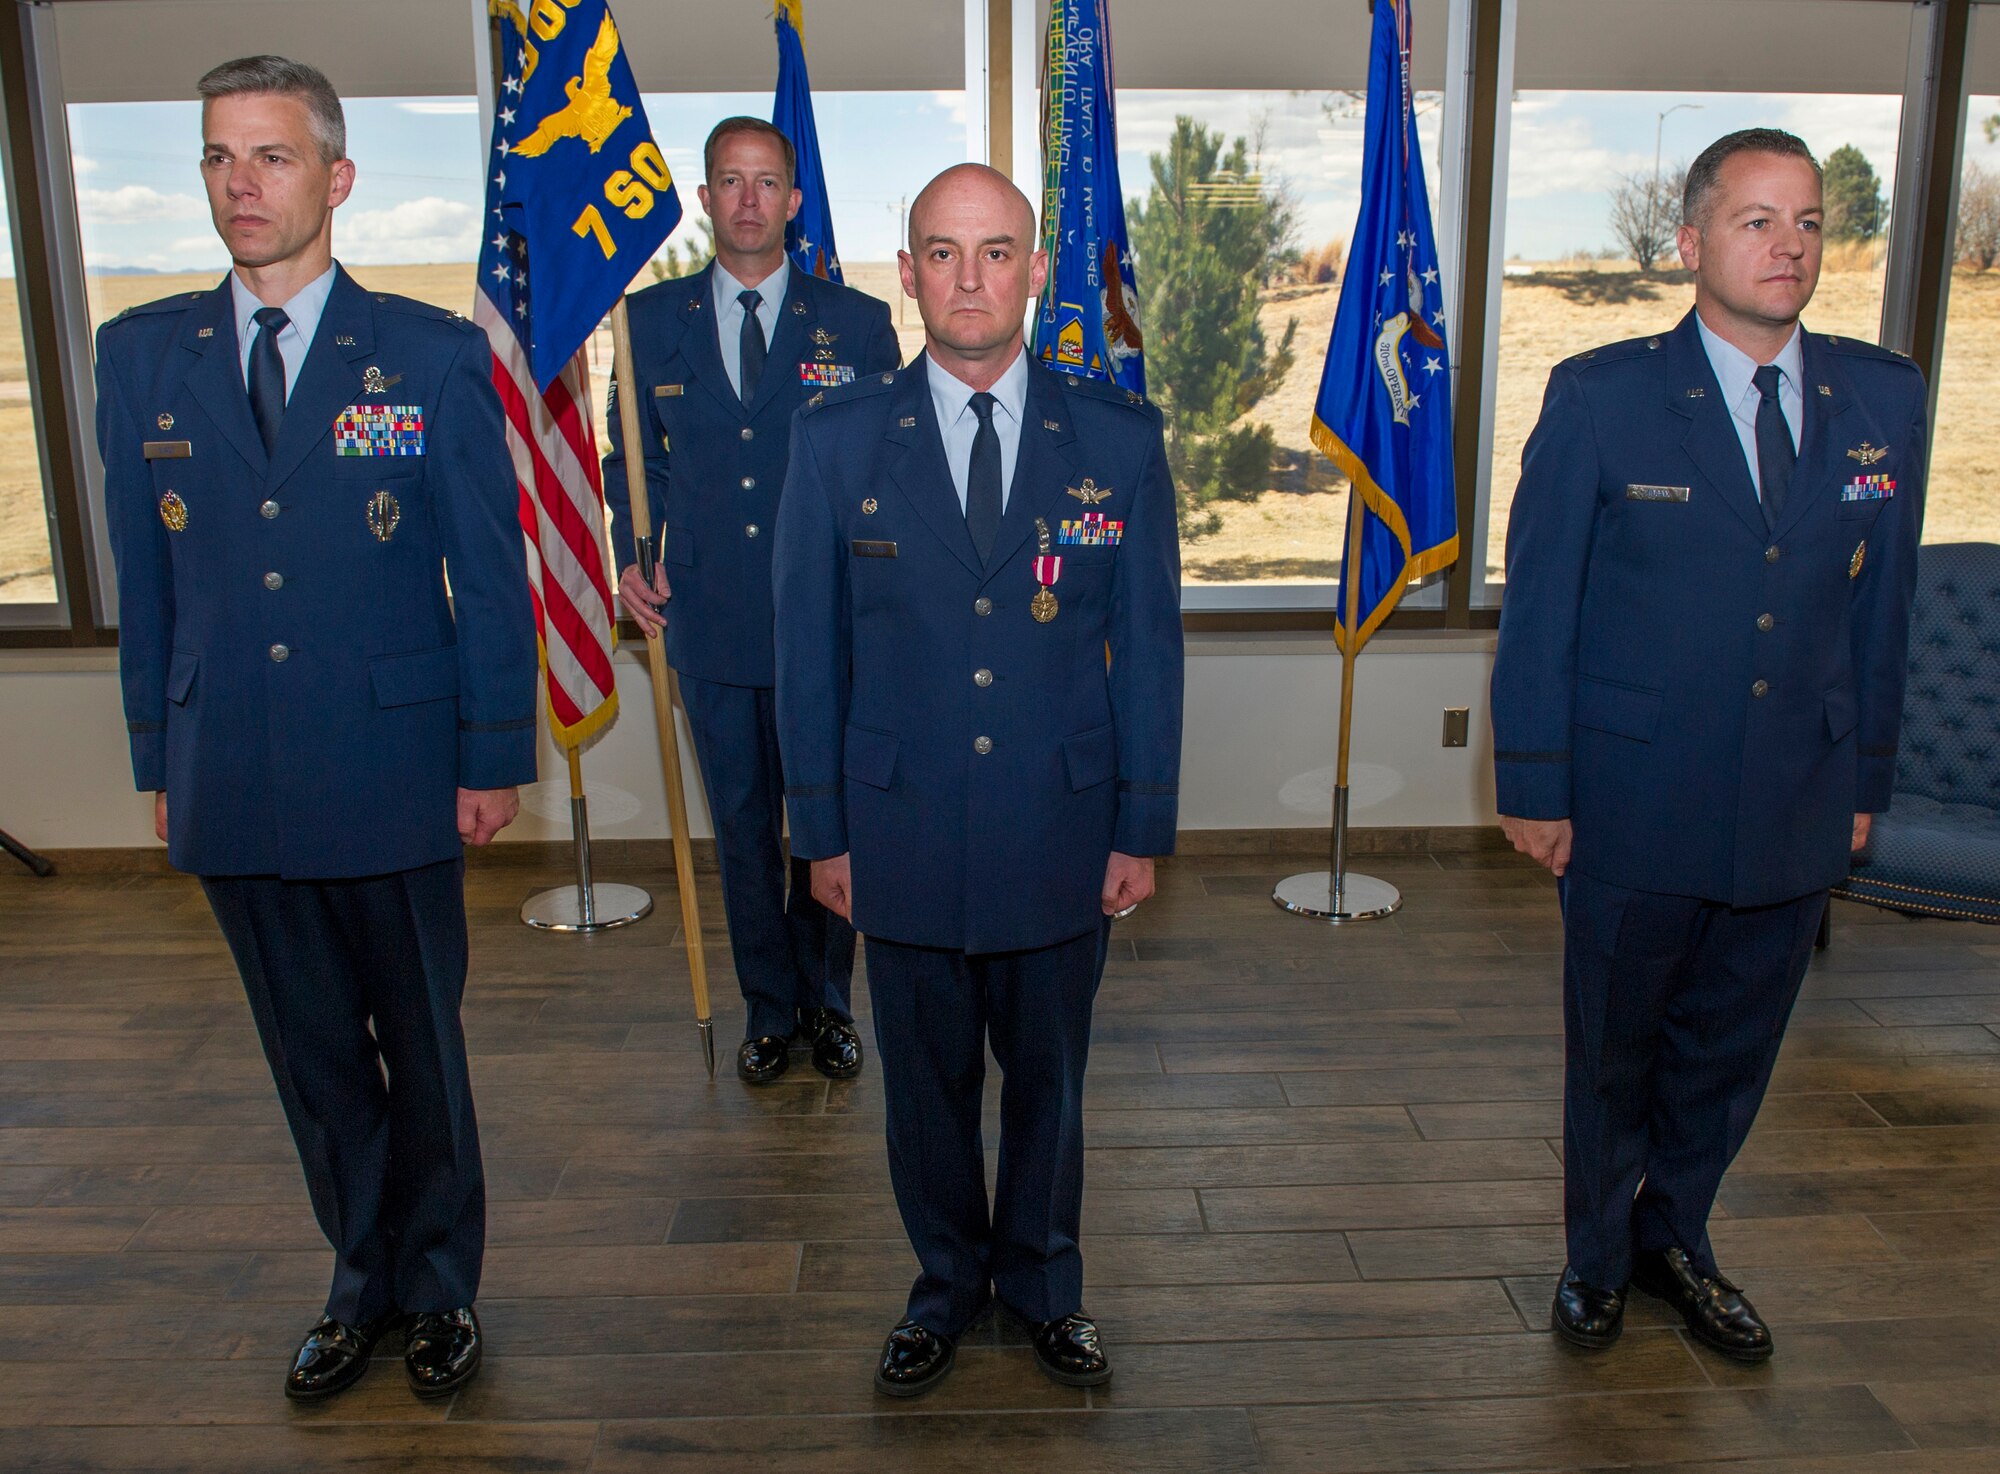 Col. Stephen Slade, 310th Operations Group commander, Col. Mark Stafford, outgoing 7th Space Operations Squadron commander, and Lieutenant Col. James Hogan, incoming 7 SOPS commander, stand at attention during the change of command ceremony on Sunday, Apr. 8th, 2018.